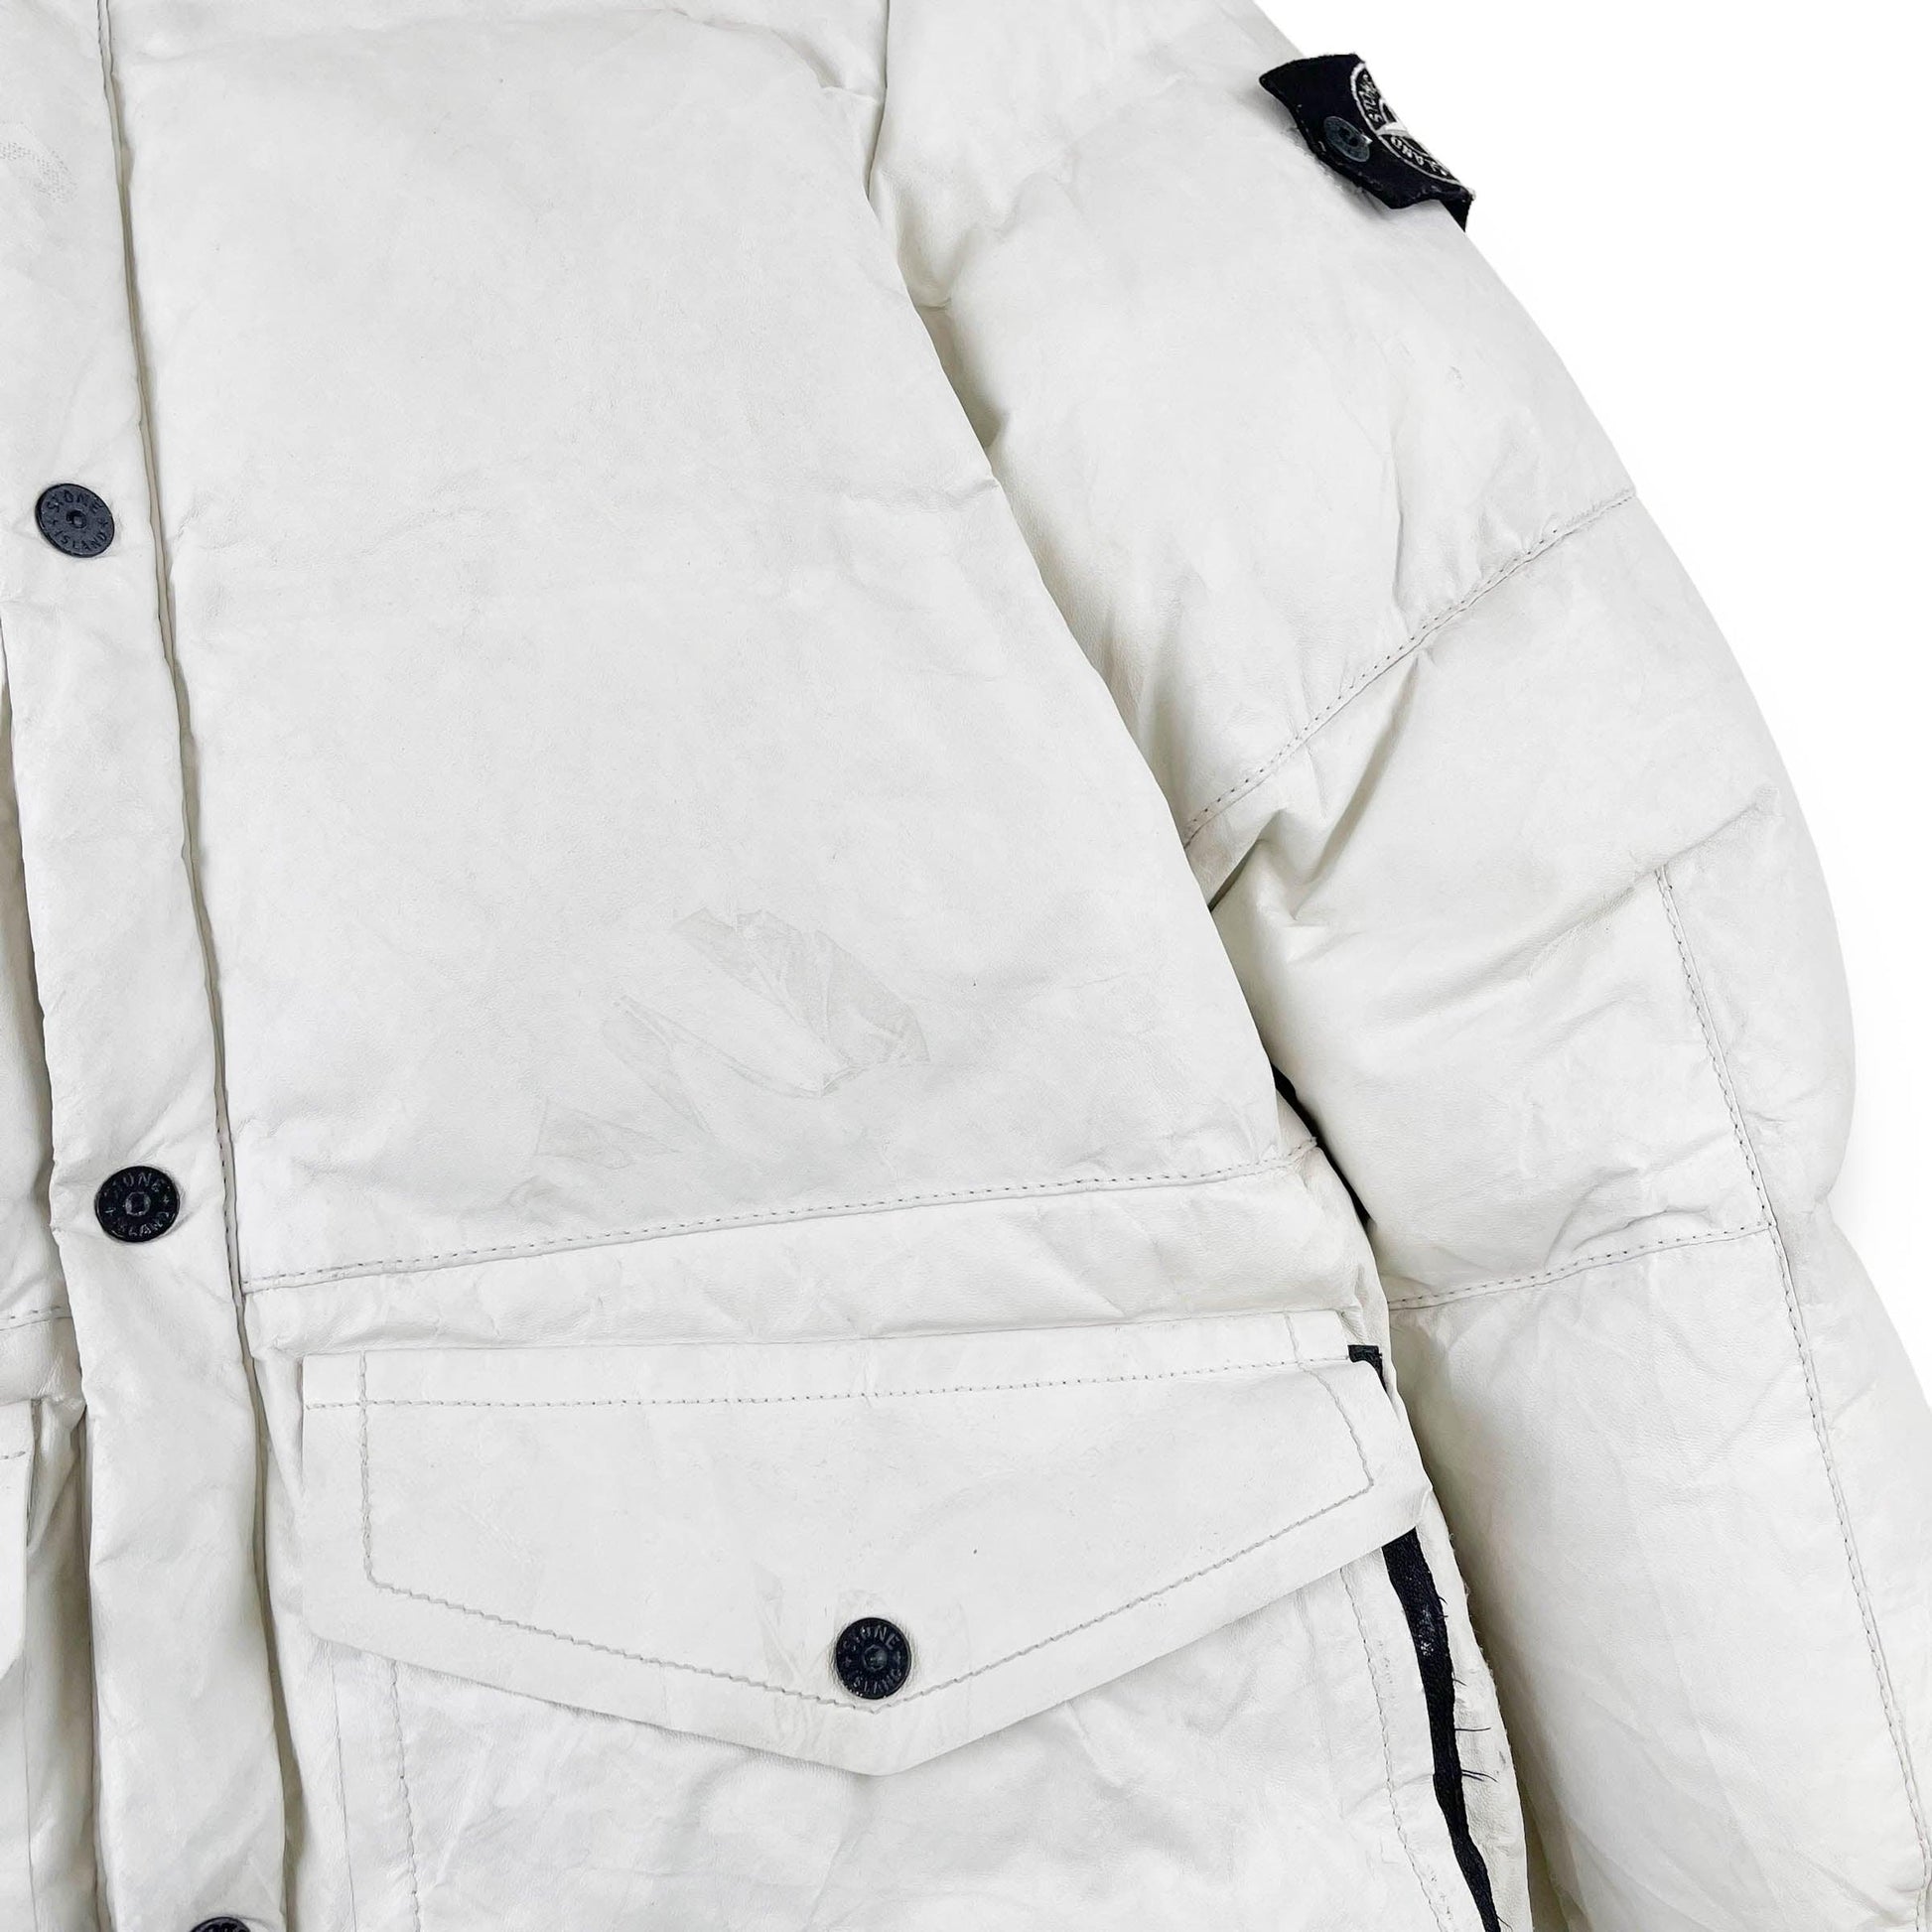 Stone island Featherweight Leather Down Jacket (M) - Known Source